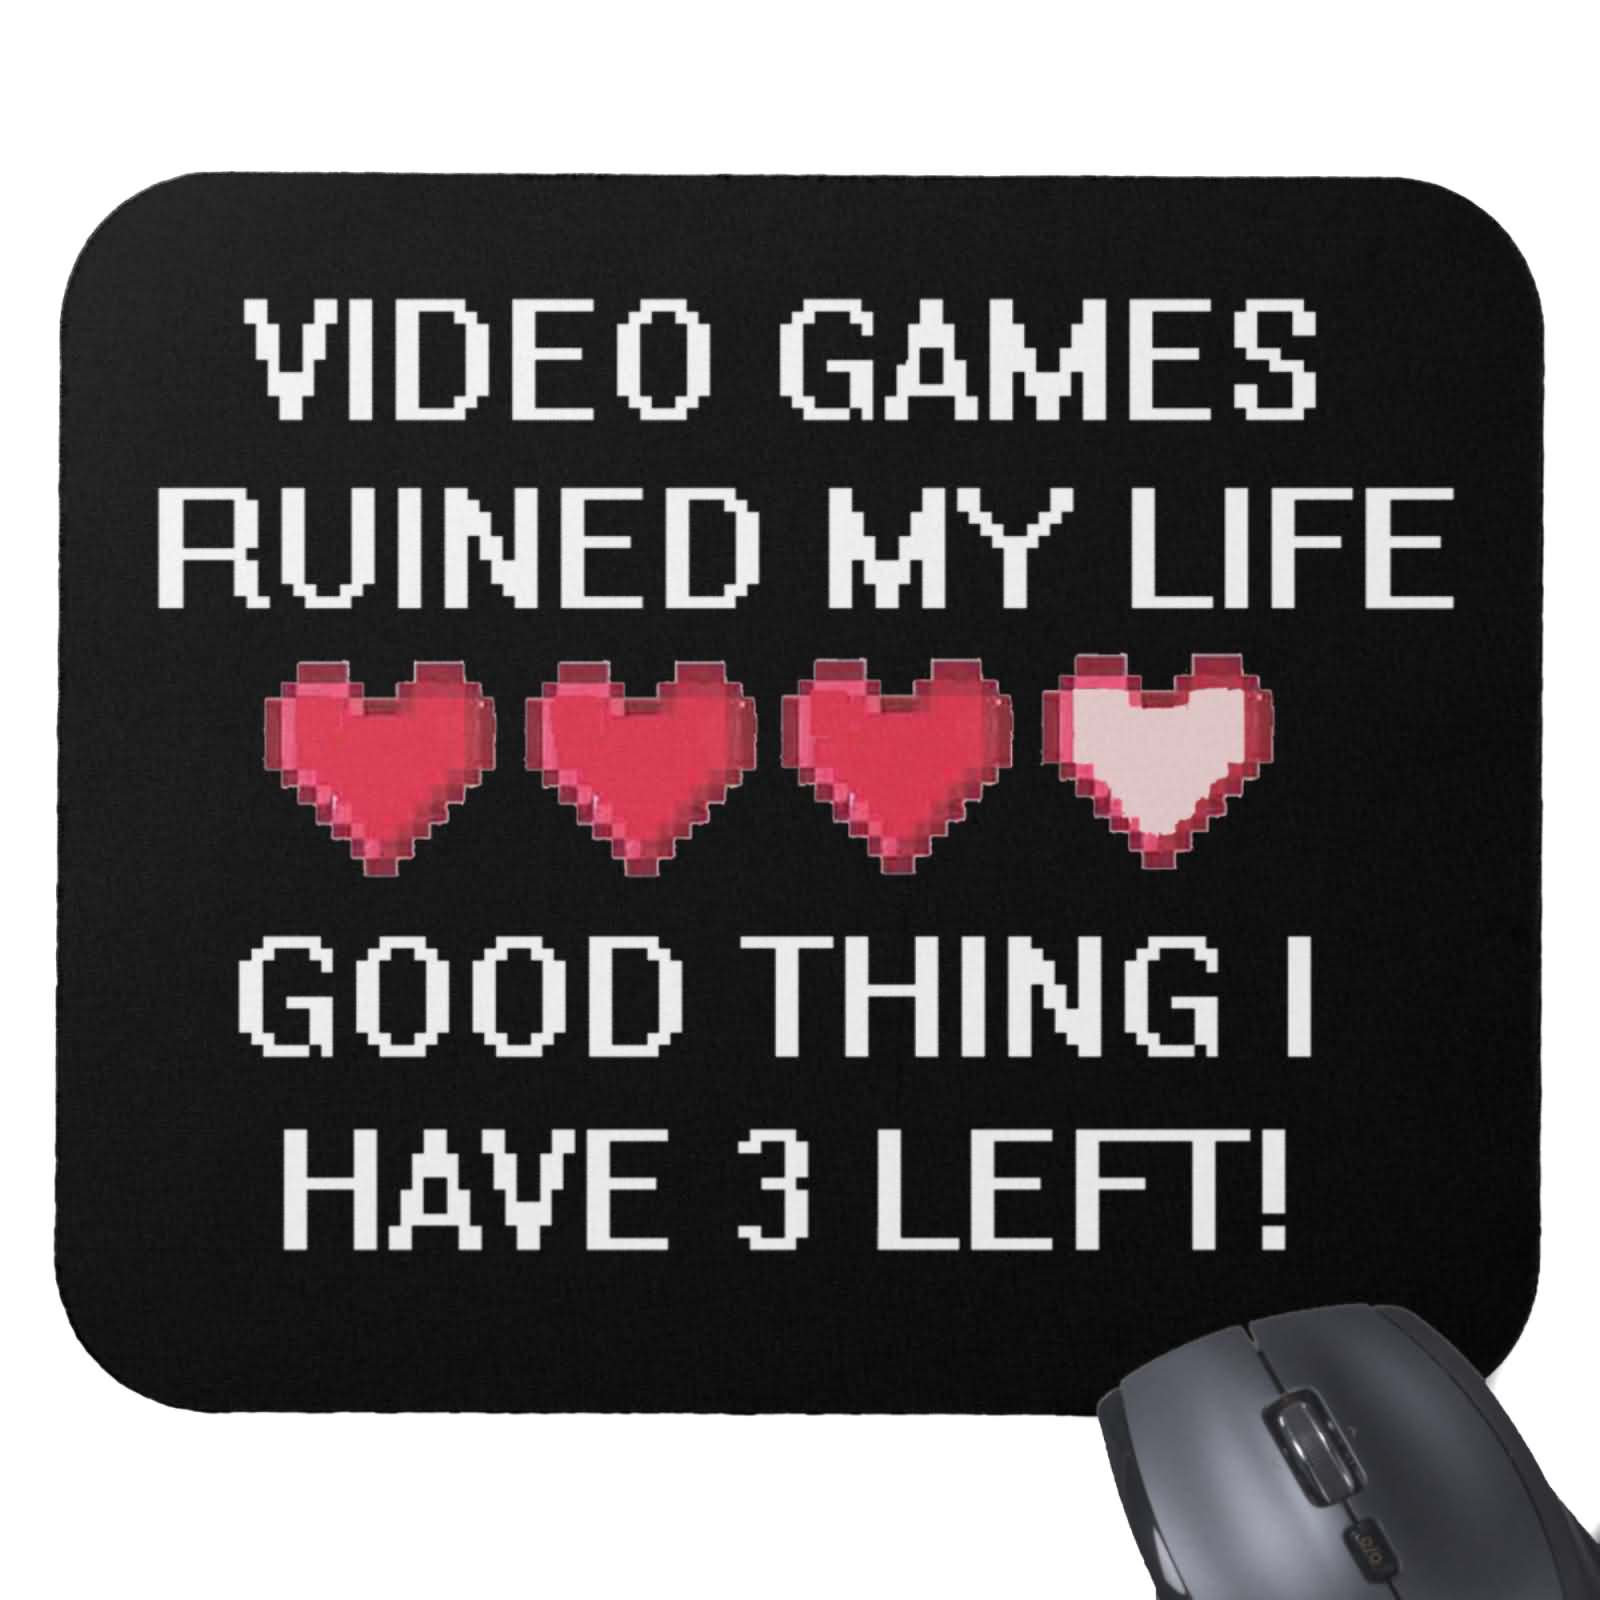 Video games ruined my life good thing have 3 left happy National Video Games Day